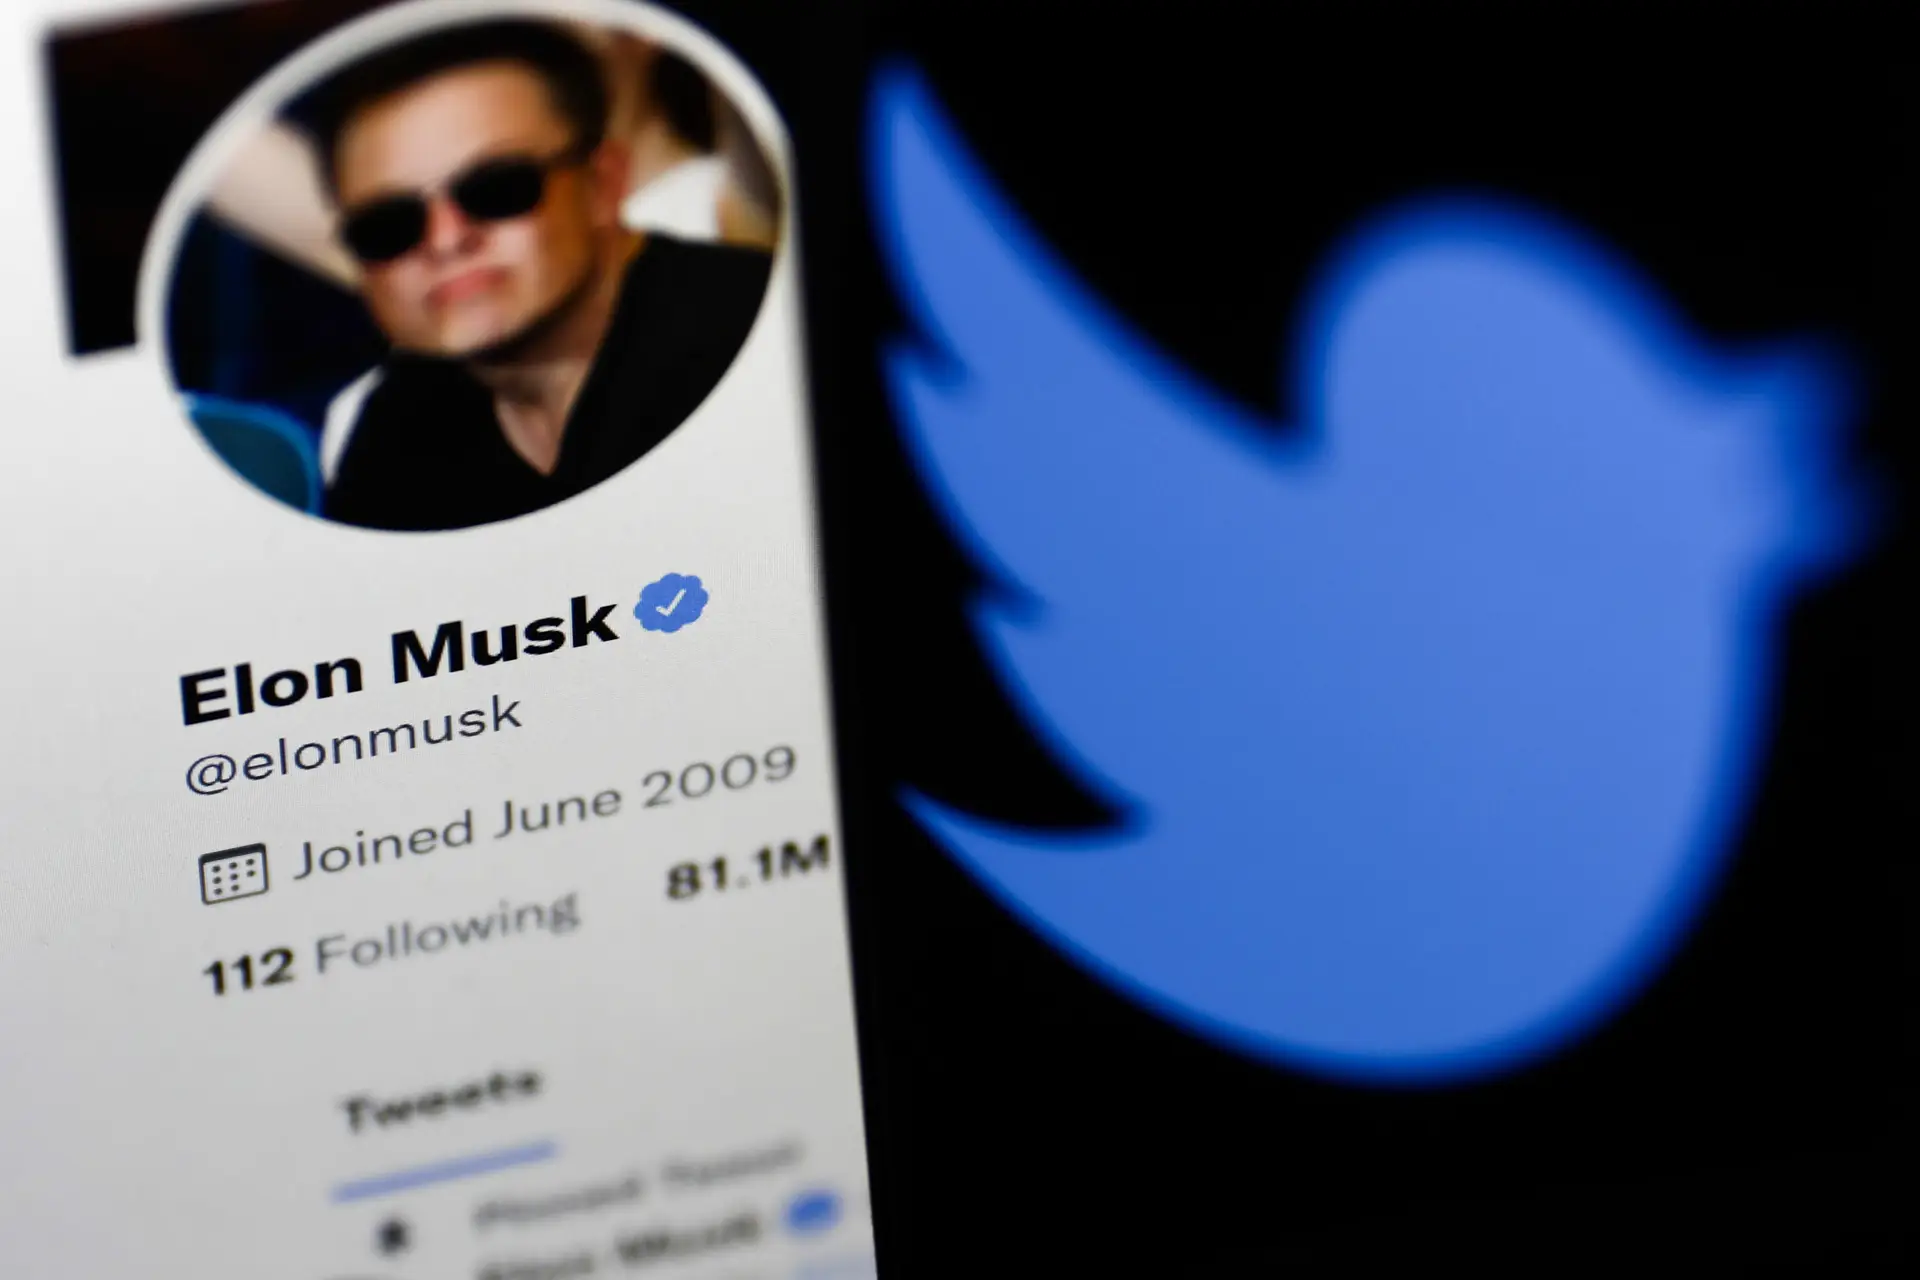 Elon Musk’s Twitter profile displayed on a computer screen and Twitter logo displayed on a phone screen are seen in this illustration photo taken in Krakow, Poland on April 9, 2022. (Photo by Jakub Porzycki/NurPhoto via Getty Images)